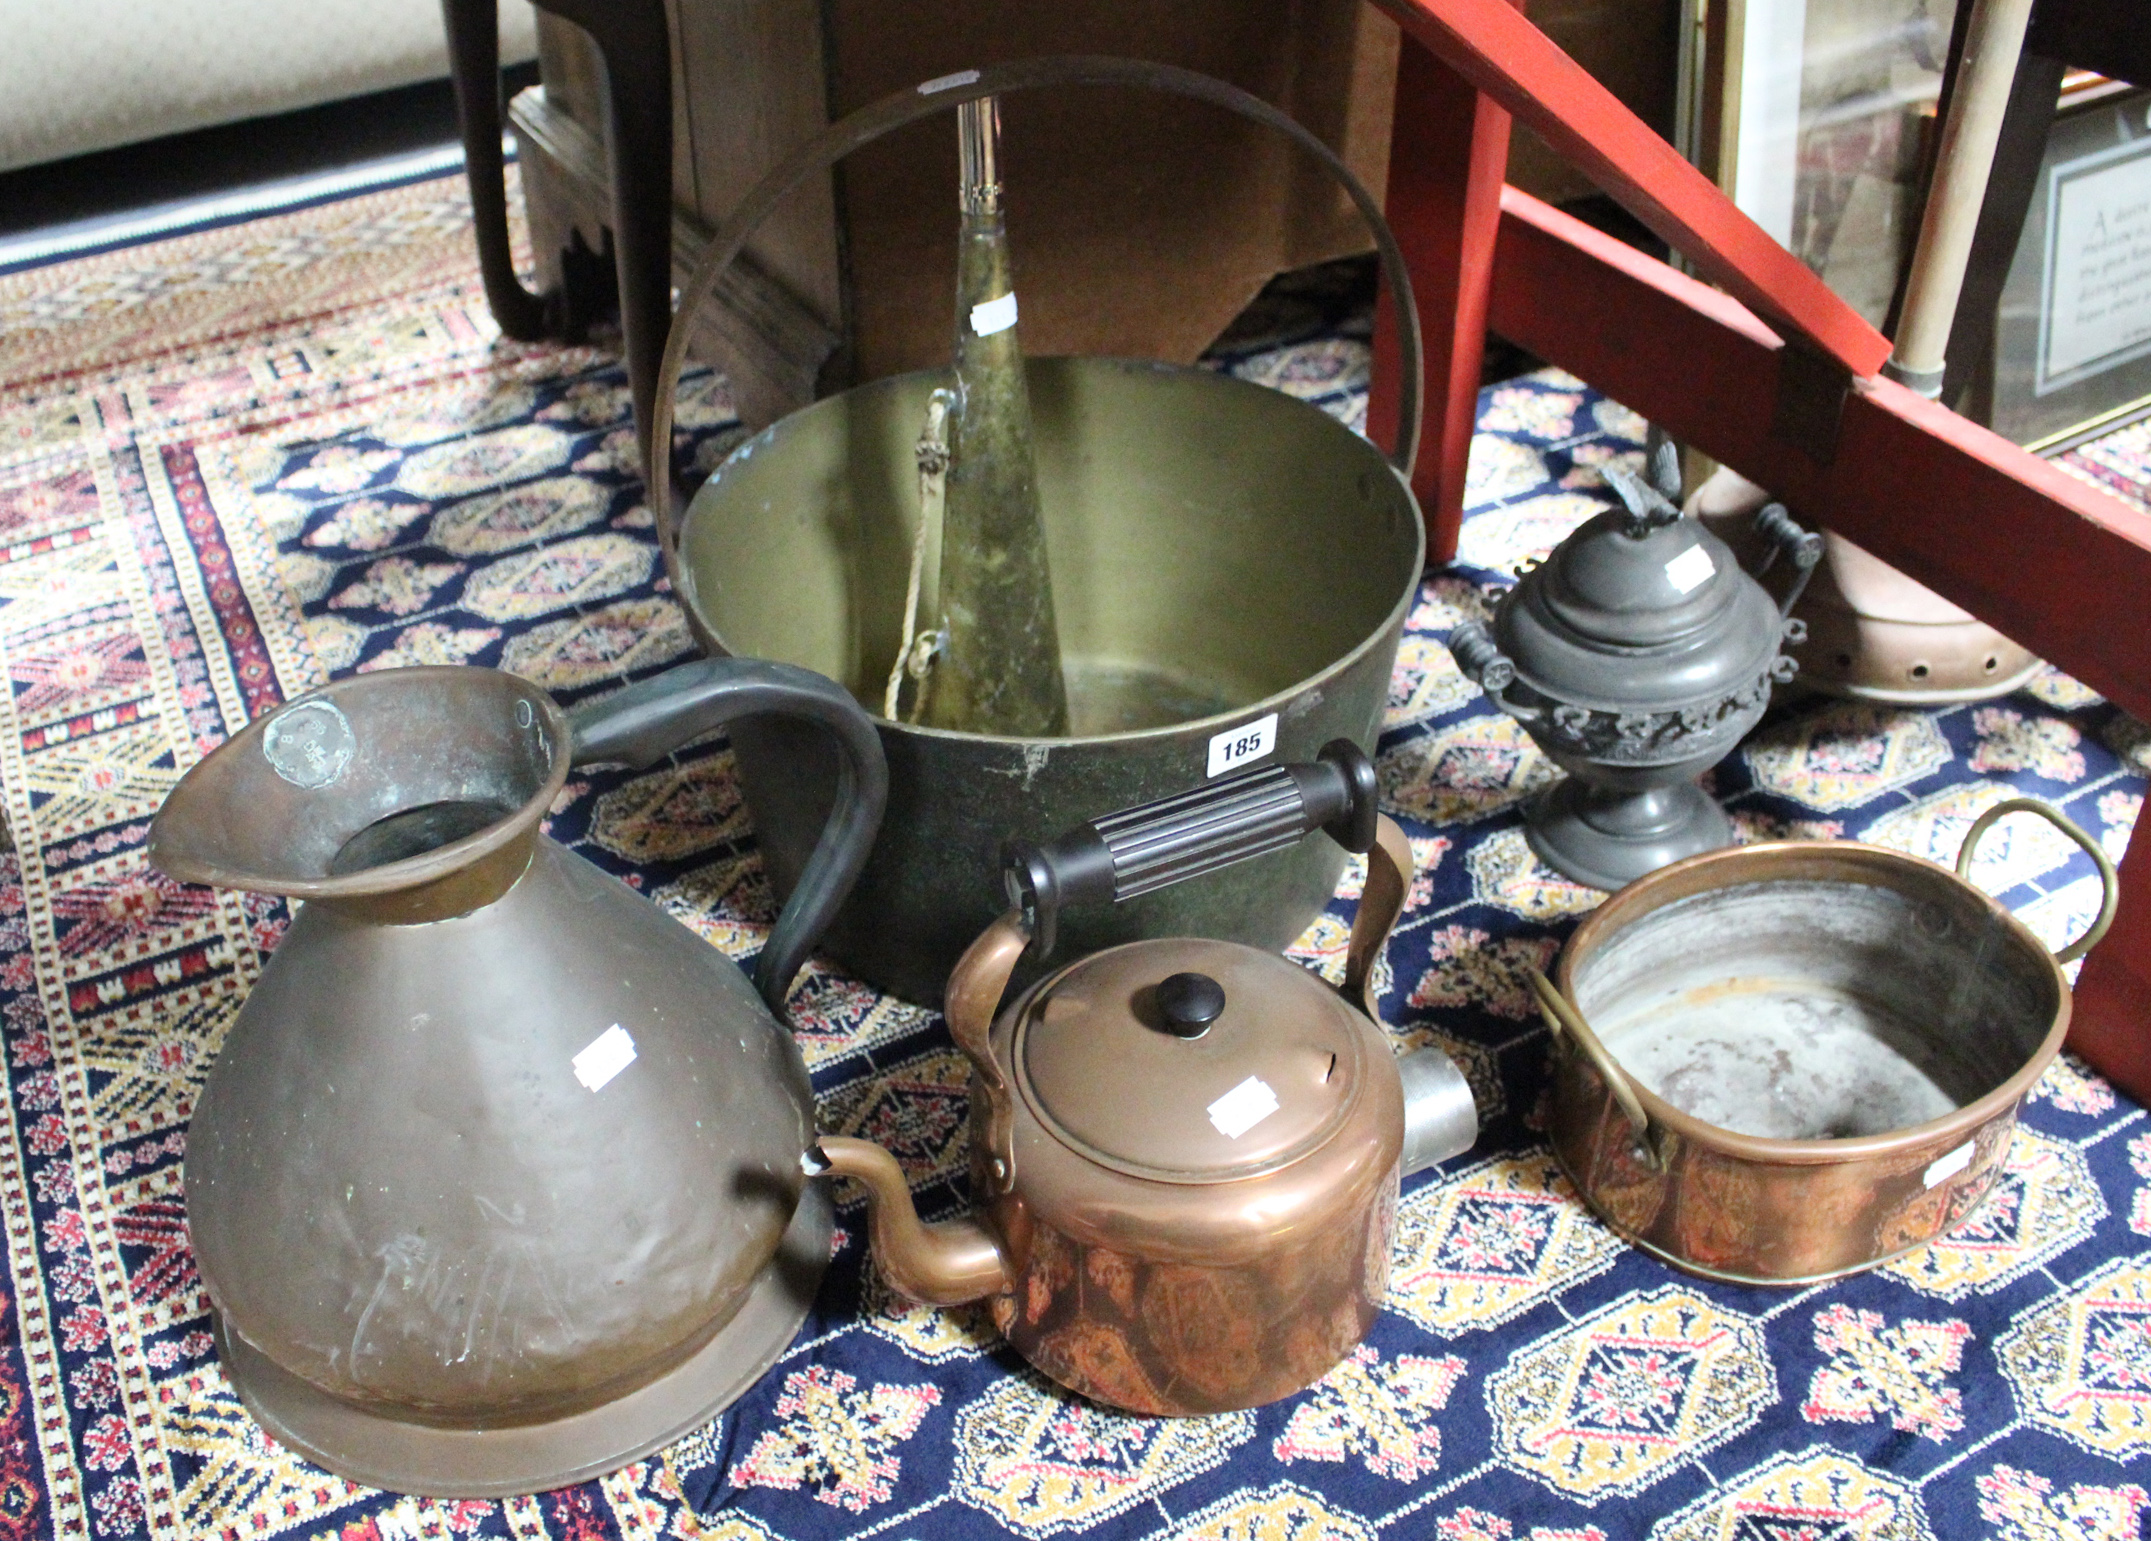 A brass preserve pan with iron overhang handle; a copper circular kettle; a wash dolly & various